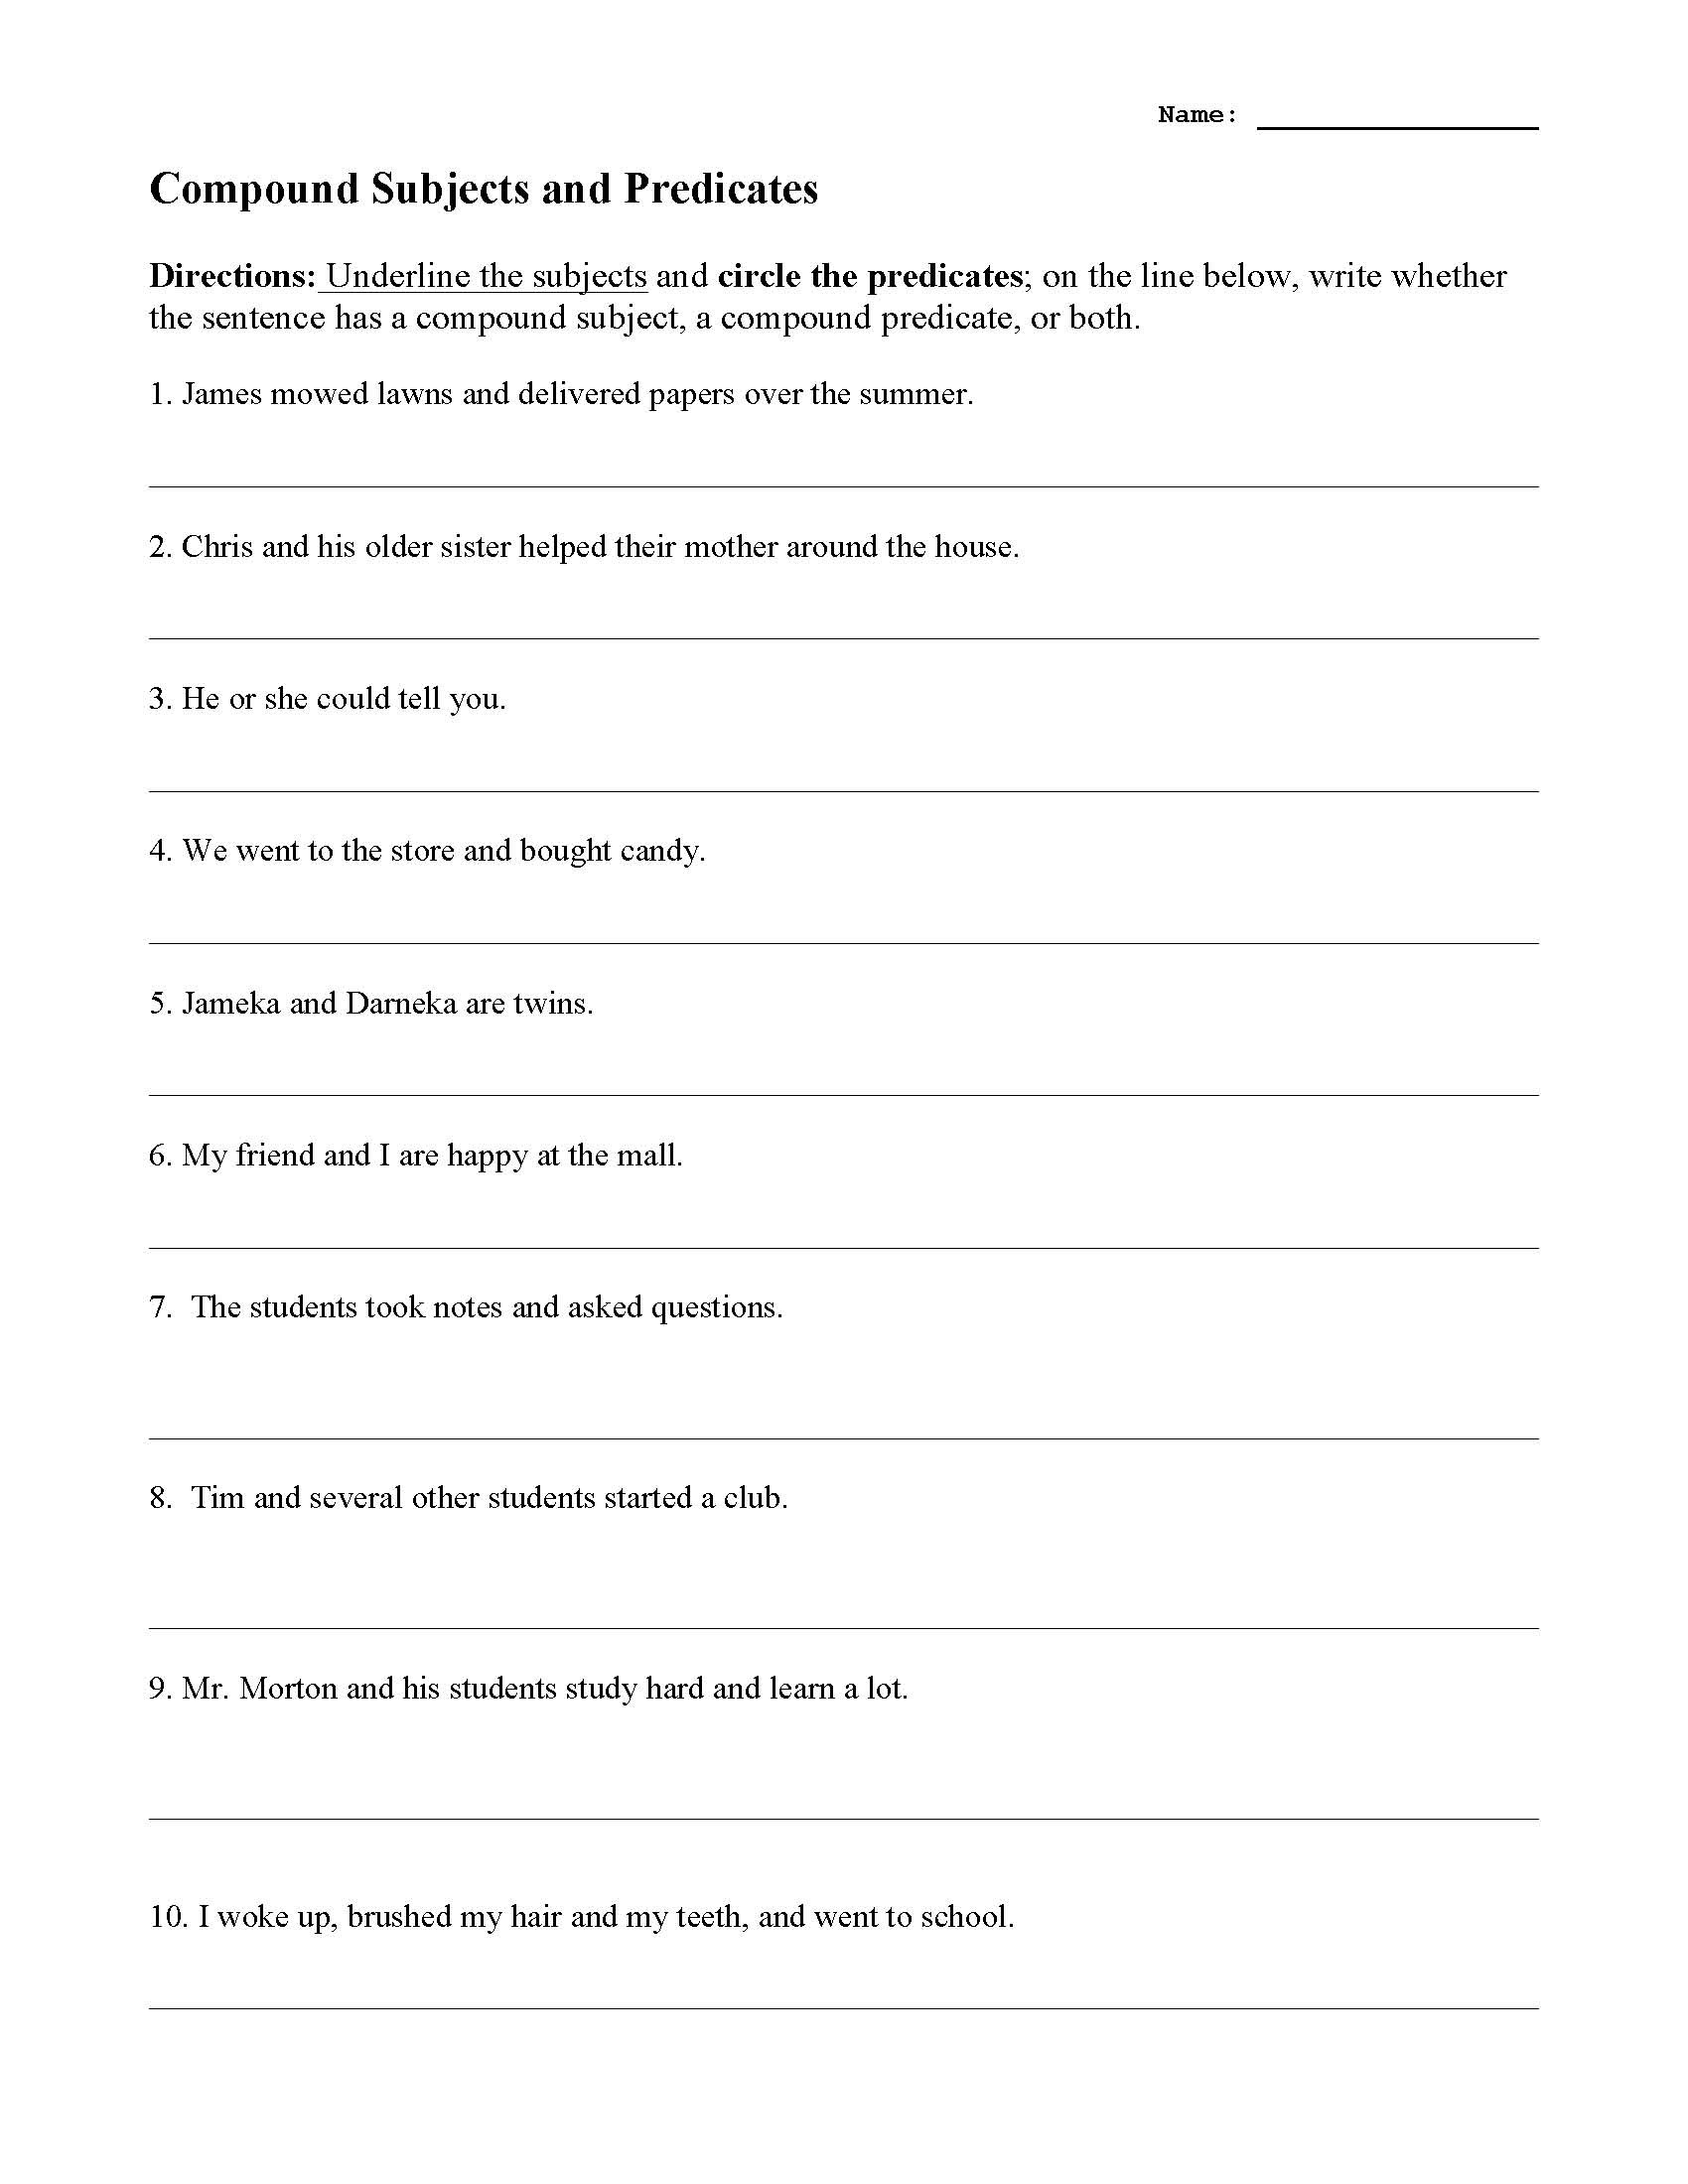 Subject and Predicate Worksheet Pound Subjects and Predicates Worksheet